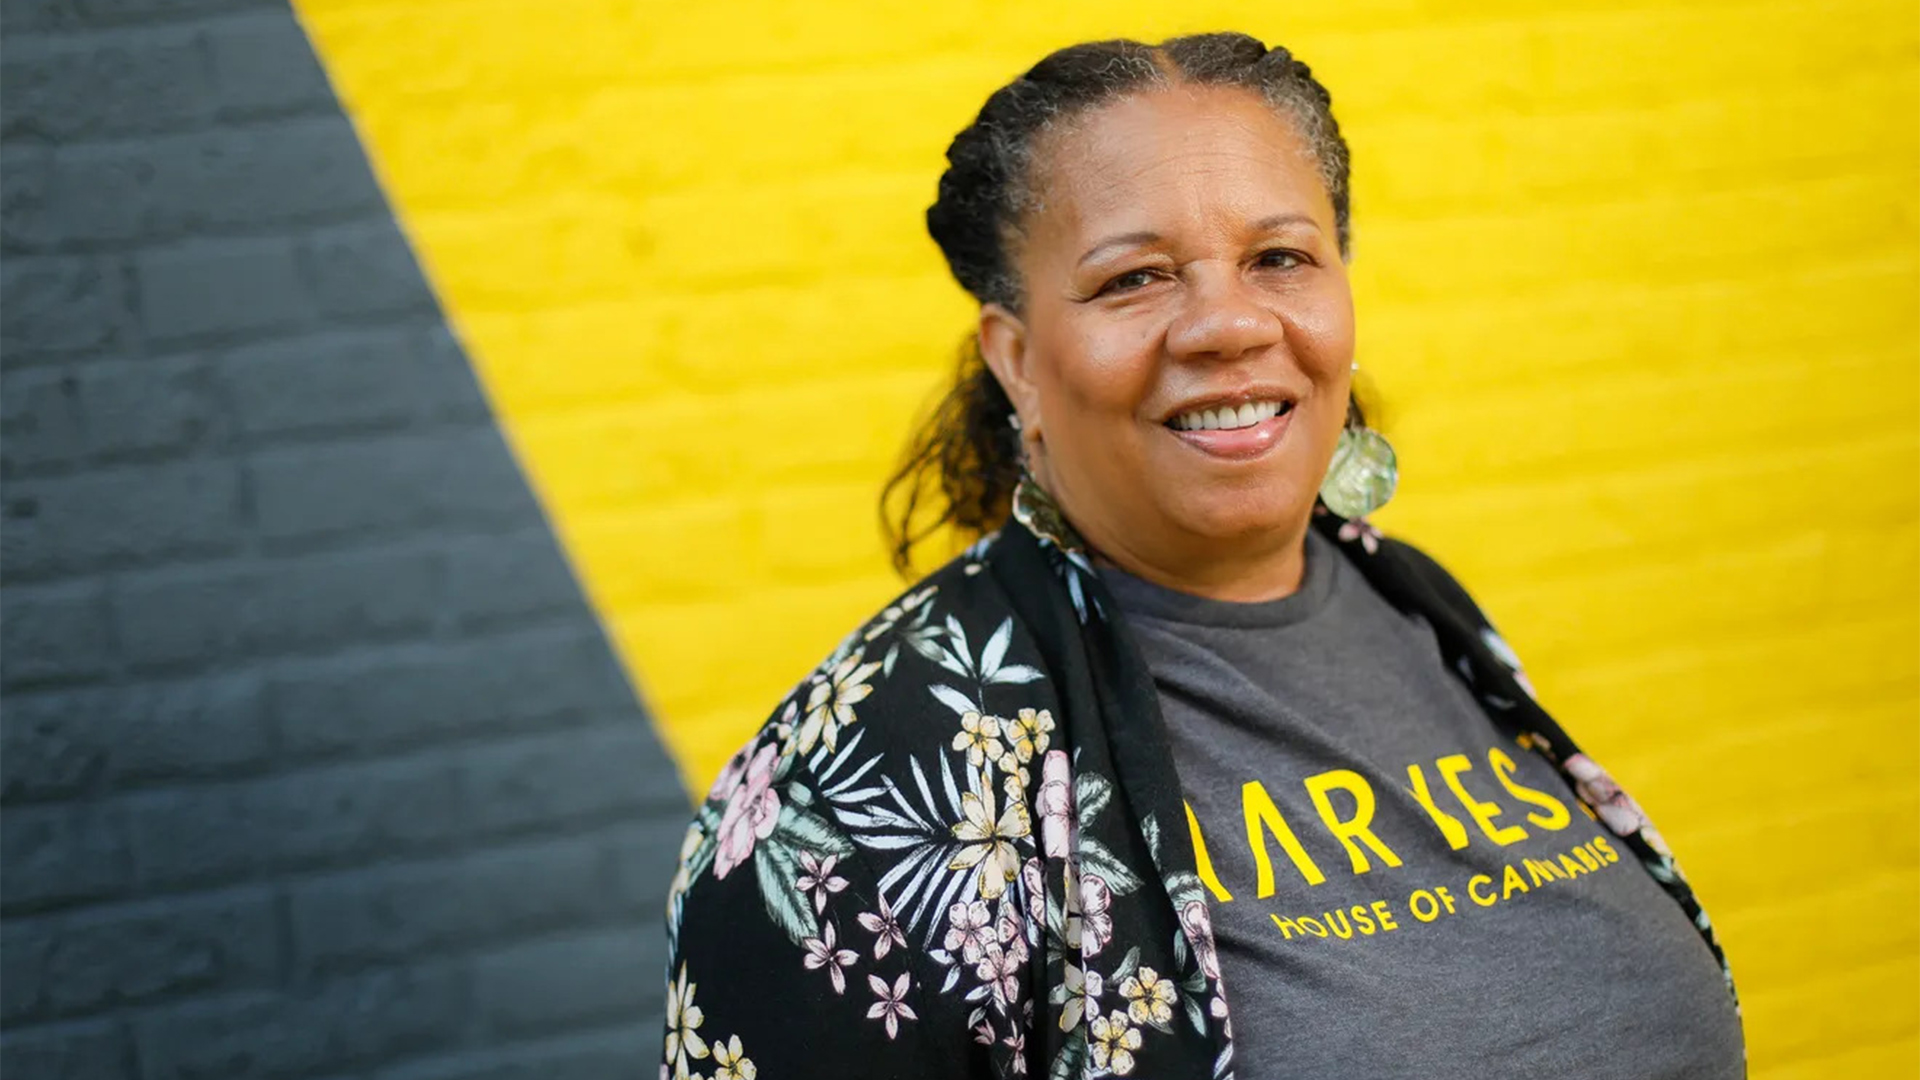 Meet The Only Black Woman Licensed To Grow, Dispense & Sell Cannabis In The State Of Ohio